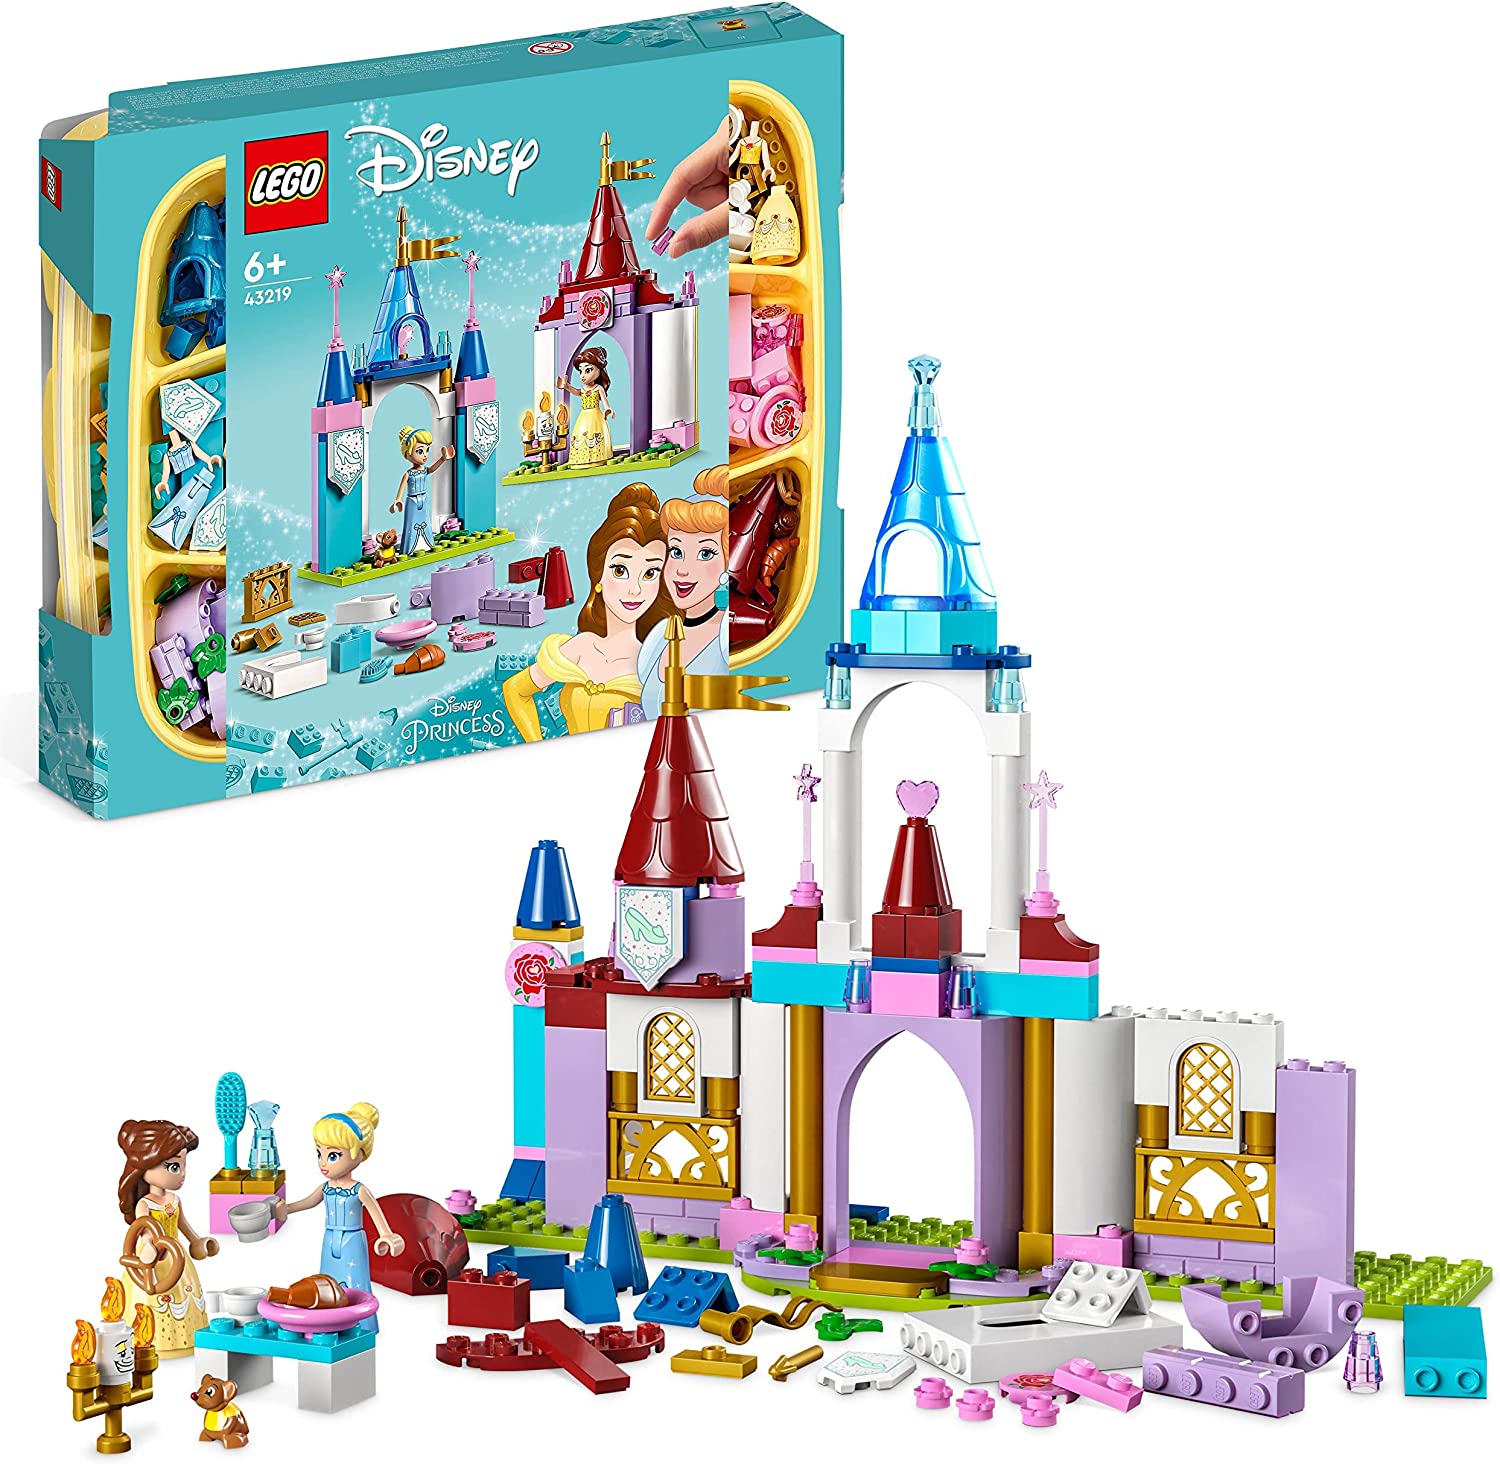 LEGO 43219 Disney Princess Creative Castle Box, Toy Castle Playset with Belle and Cinderella Mini Dolls and Stones Sorting Box, Travel Toy for Girls And Boys From 6 Years